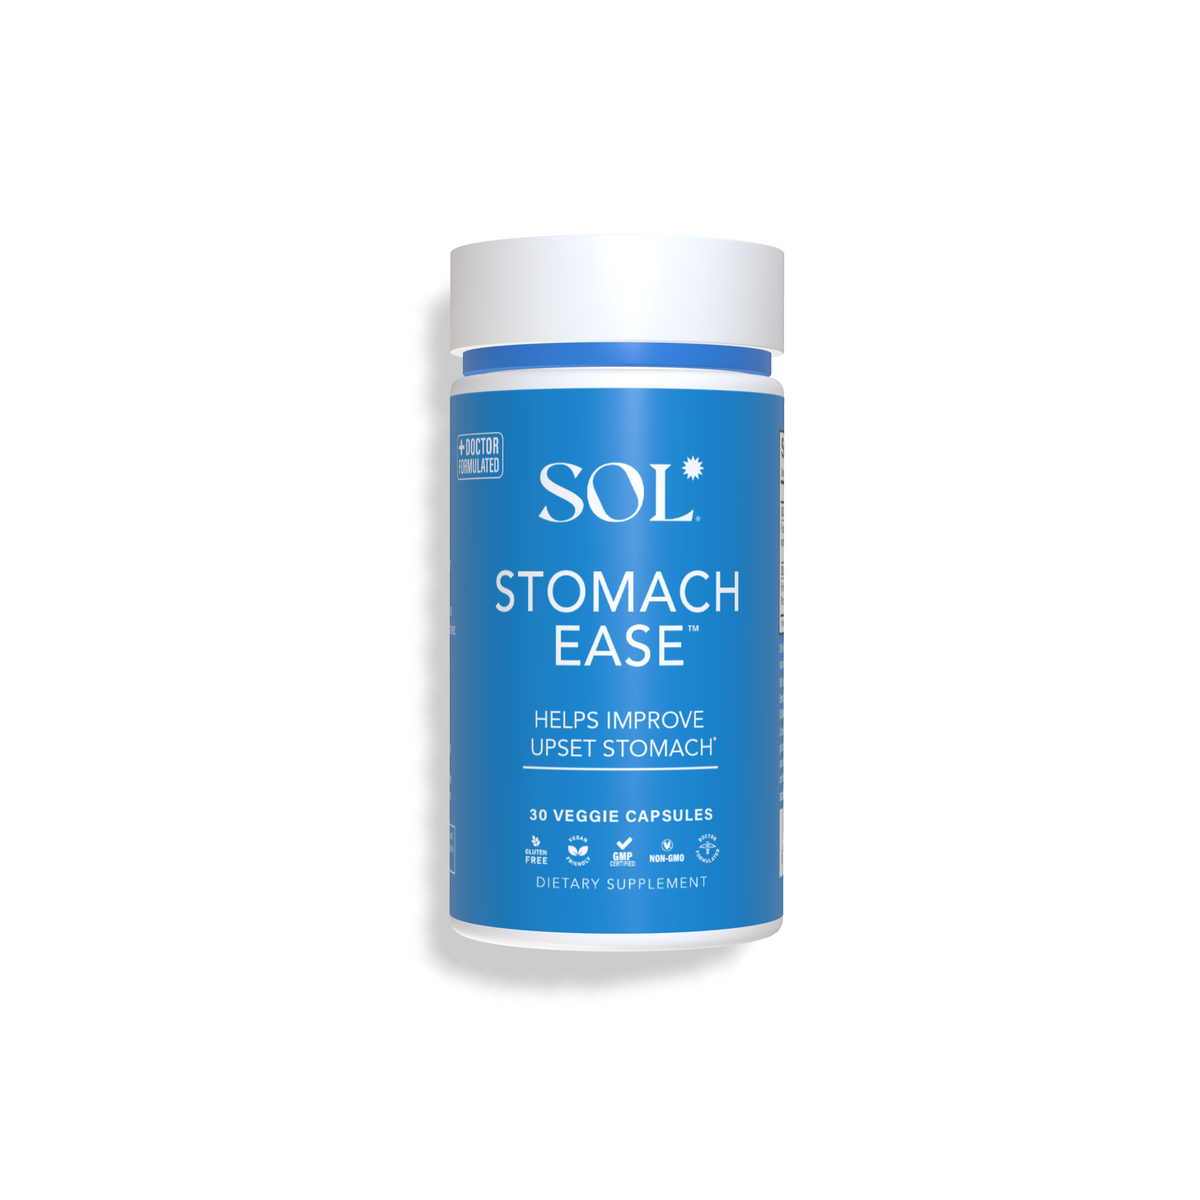 STOMACH EASE™️